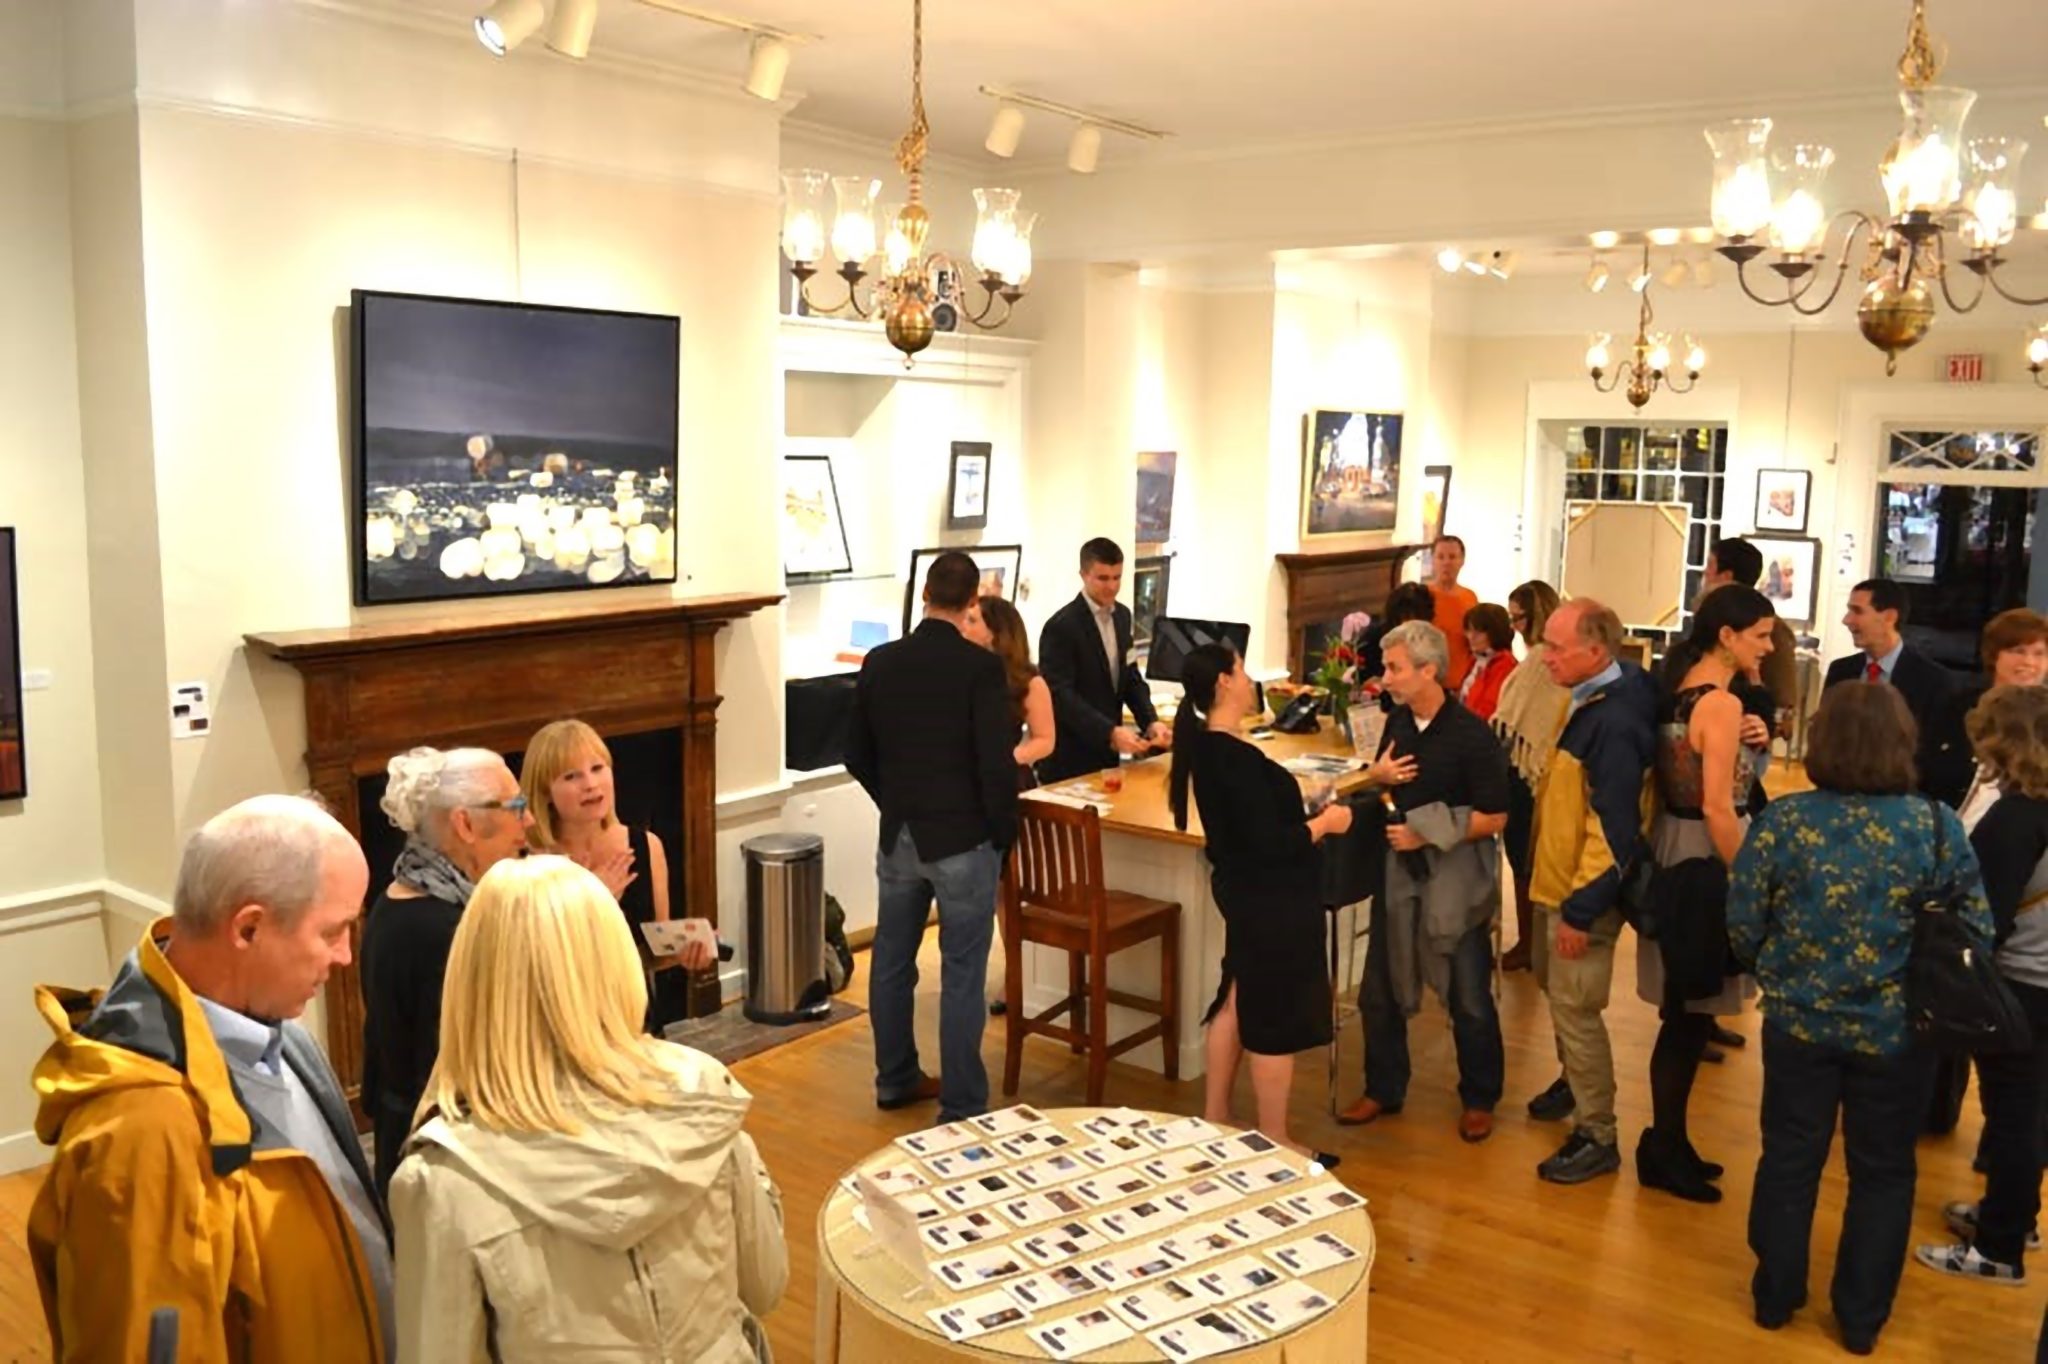 People standing in an art gallery having cocktails.